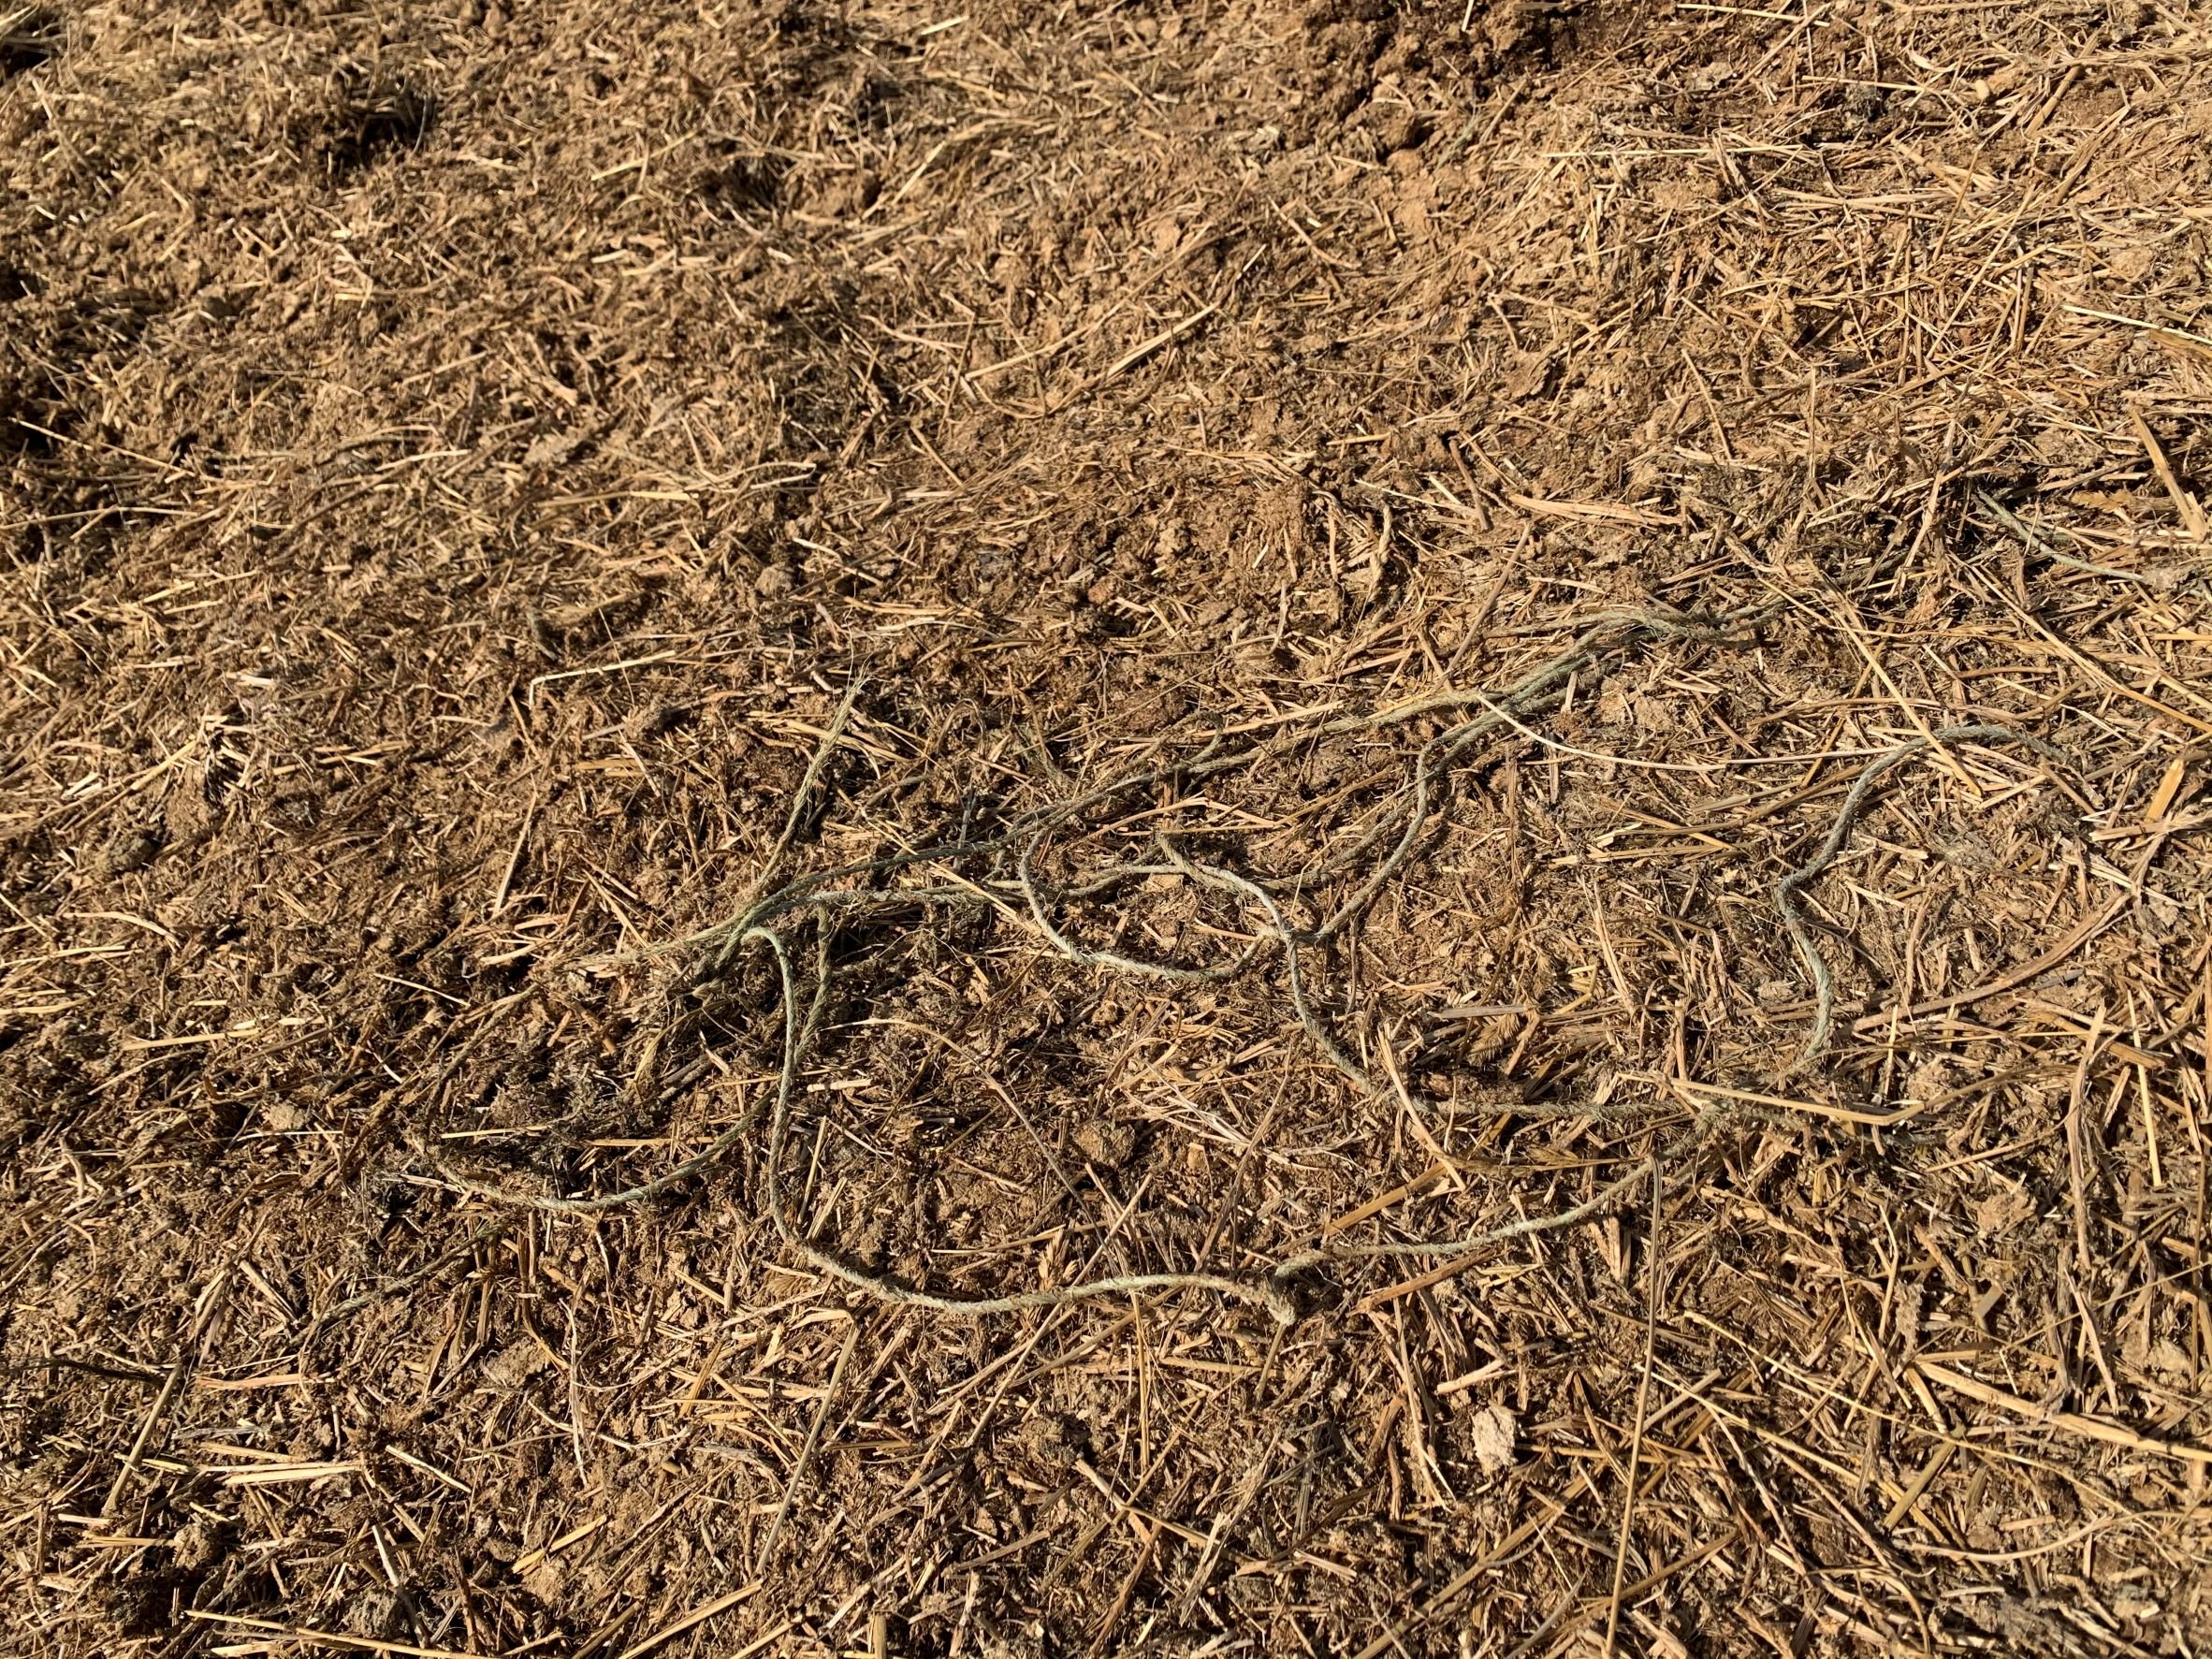 Sisal twine remaining in the bale residue. April 24, 2020. Photo credit MBFI.